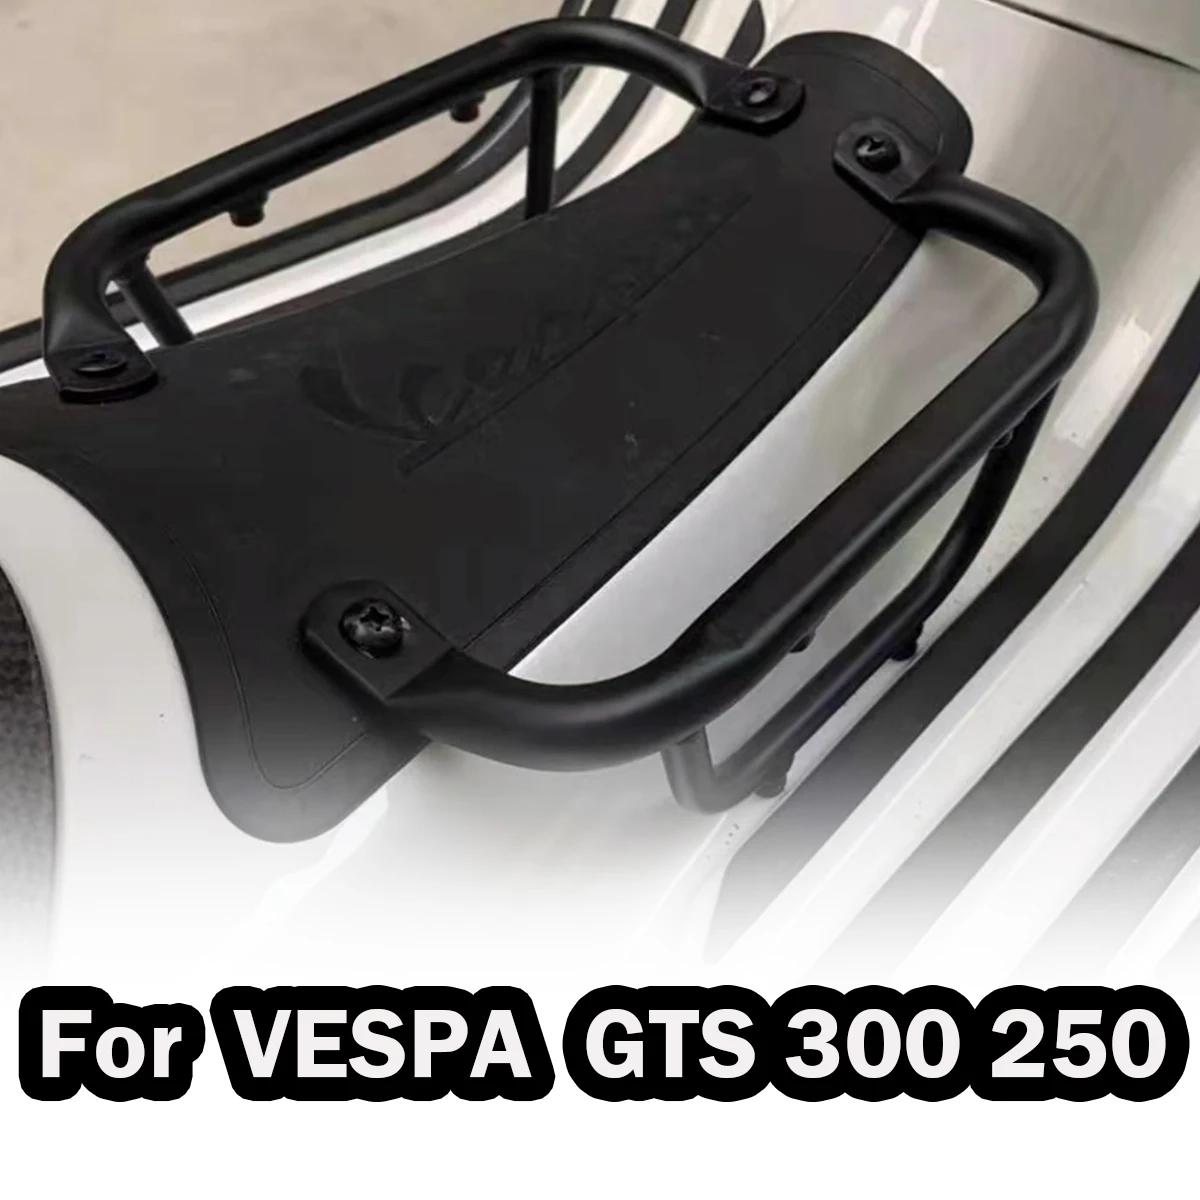 

For Vespa GTS 300 250 125 GTS300 GTS250 2013 - 2022 2021 Accessories Foot Pedal Mesh Luggage Rack Holder Bracket Carrier Support